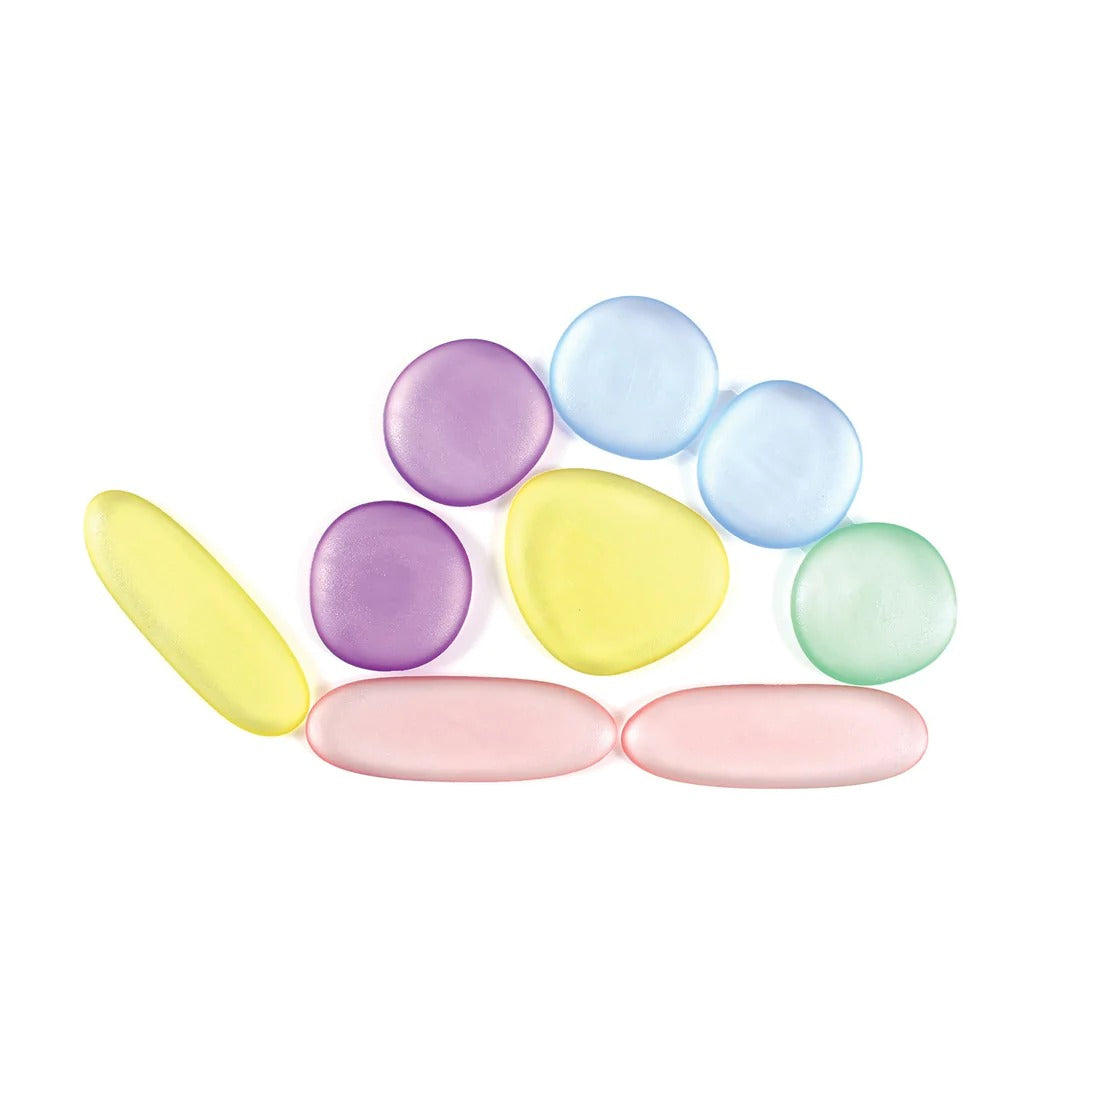 Clear Junior Rainbow Pebbles, The Clear Junior Rainbow Pebbles are an appealing early construction and manipulative set. The Clear Junior Rainbow Pebble set is ideal for developing fine motor skills and are fascinating viewed on a light panel. The smooth Clear Junior Rainbow Pebbles come in 3 shapes and 6 soft translucent colours, supplied in a convenient storage jar so they can be stored away with ease and carried on the go.The Edx Education Clear Junior Rainbow Pebbles are a special version of the famous 